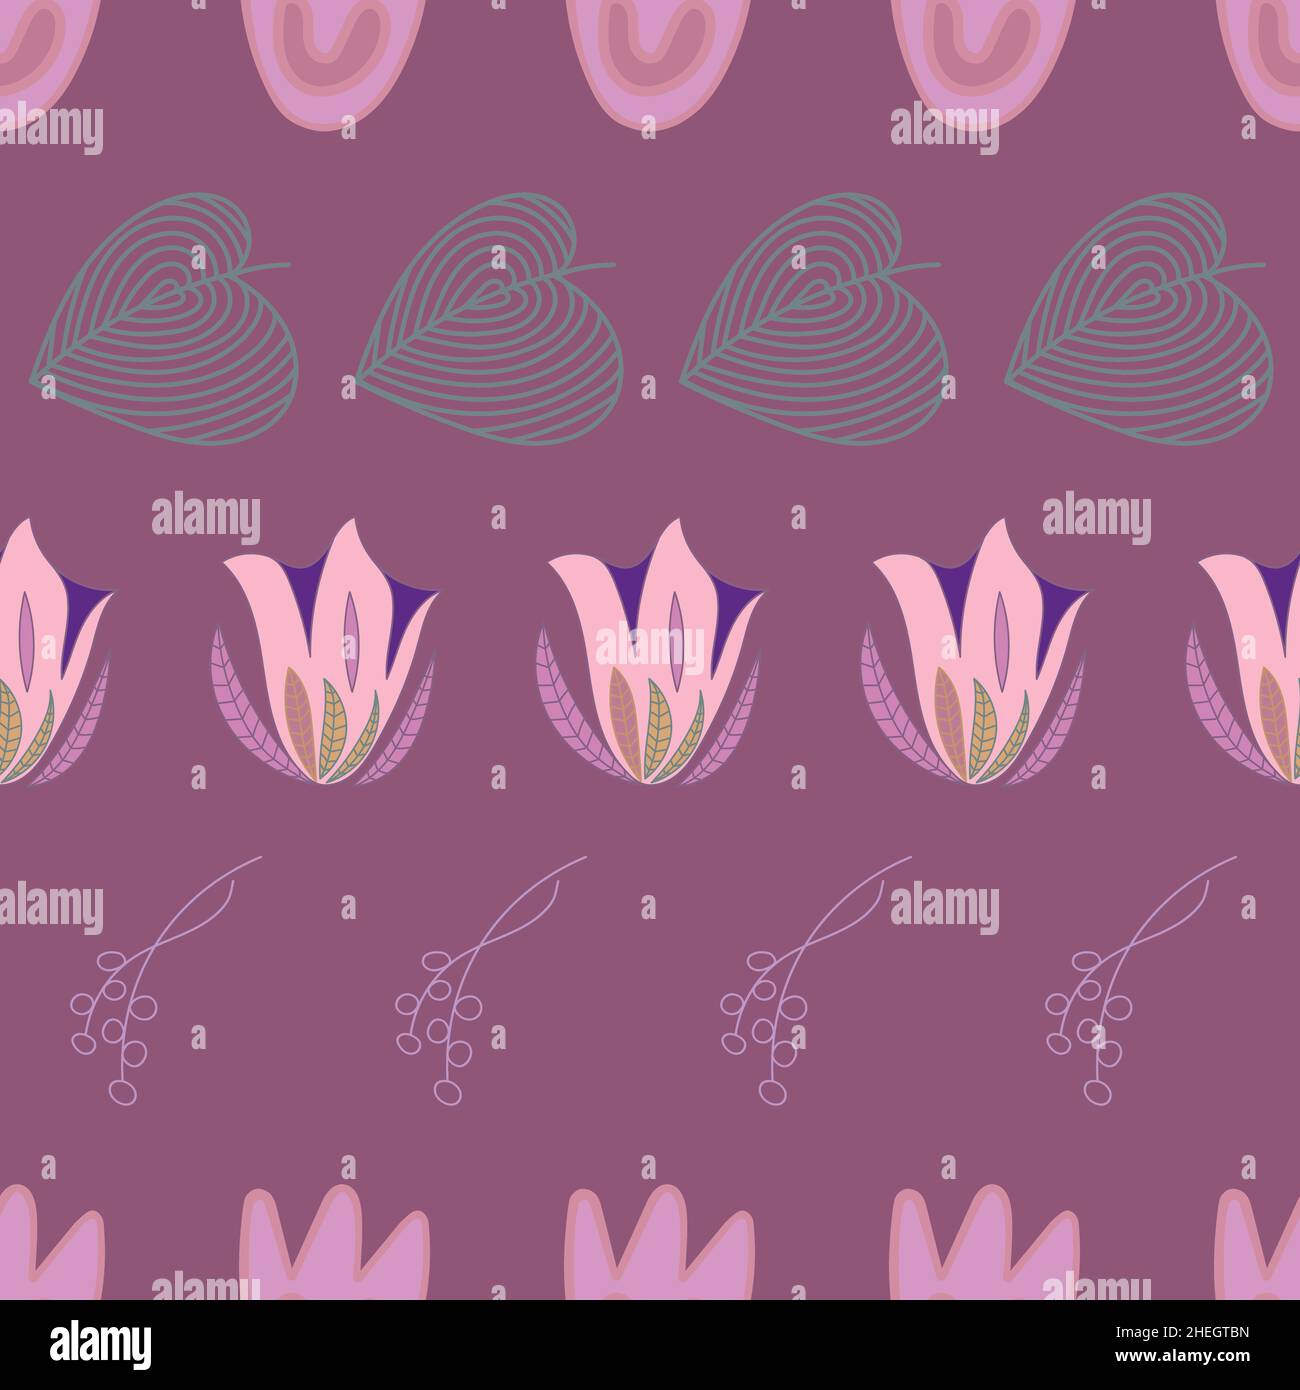 Floral seamless pattern with pink flowers arranged in rows on plum colour background. Stock Vector